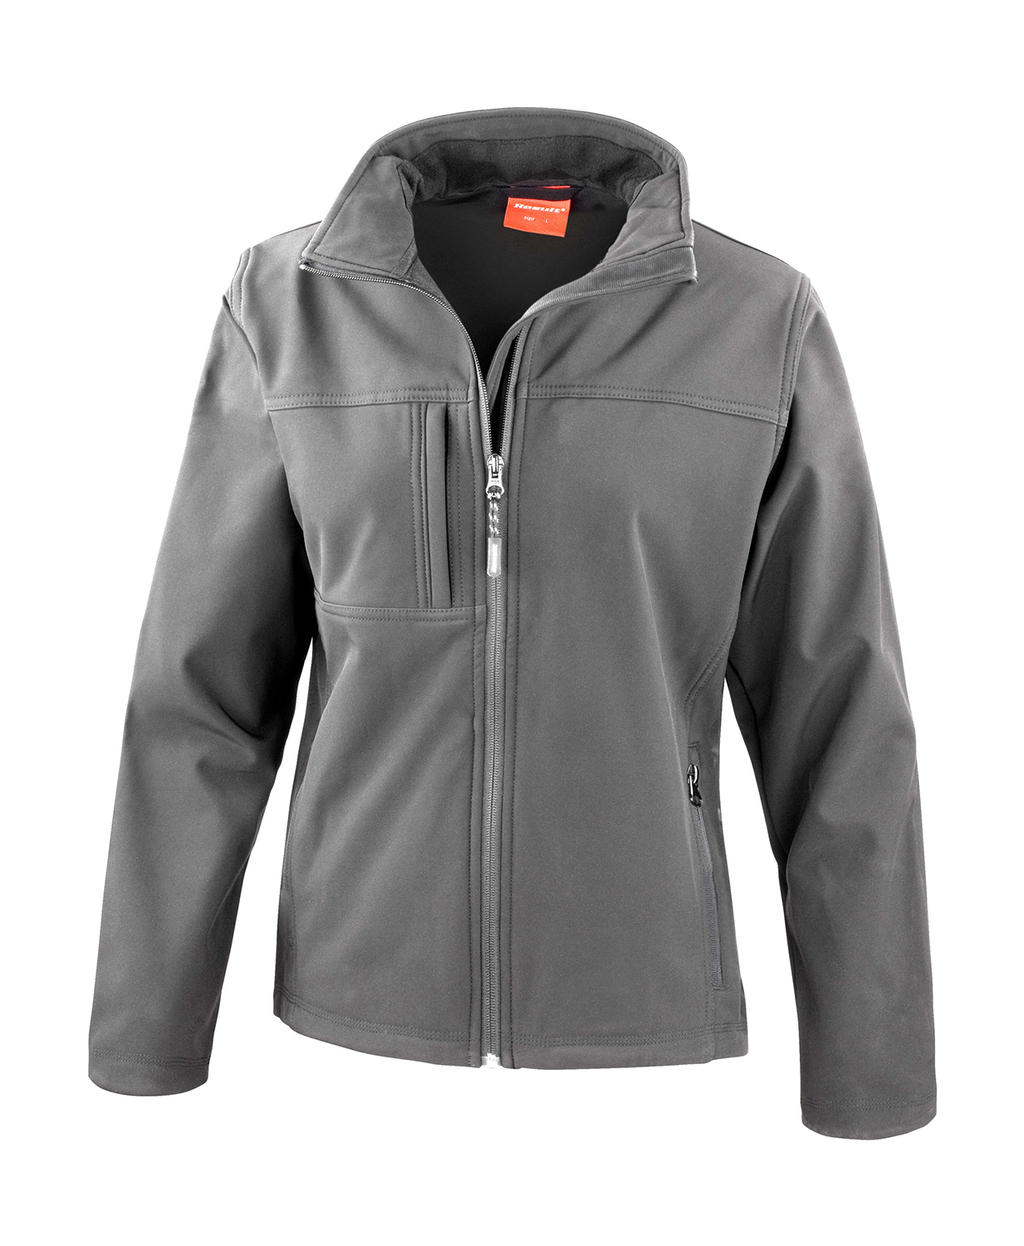  Ladies Classic Softshell Jacket in Farbe Grey